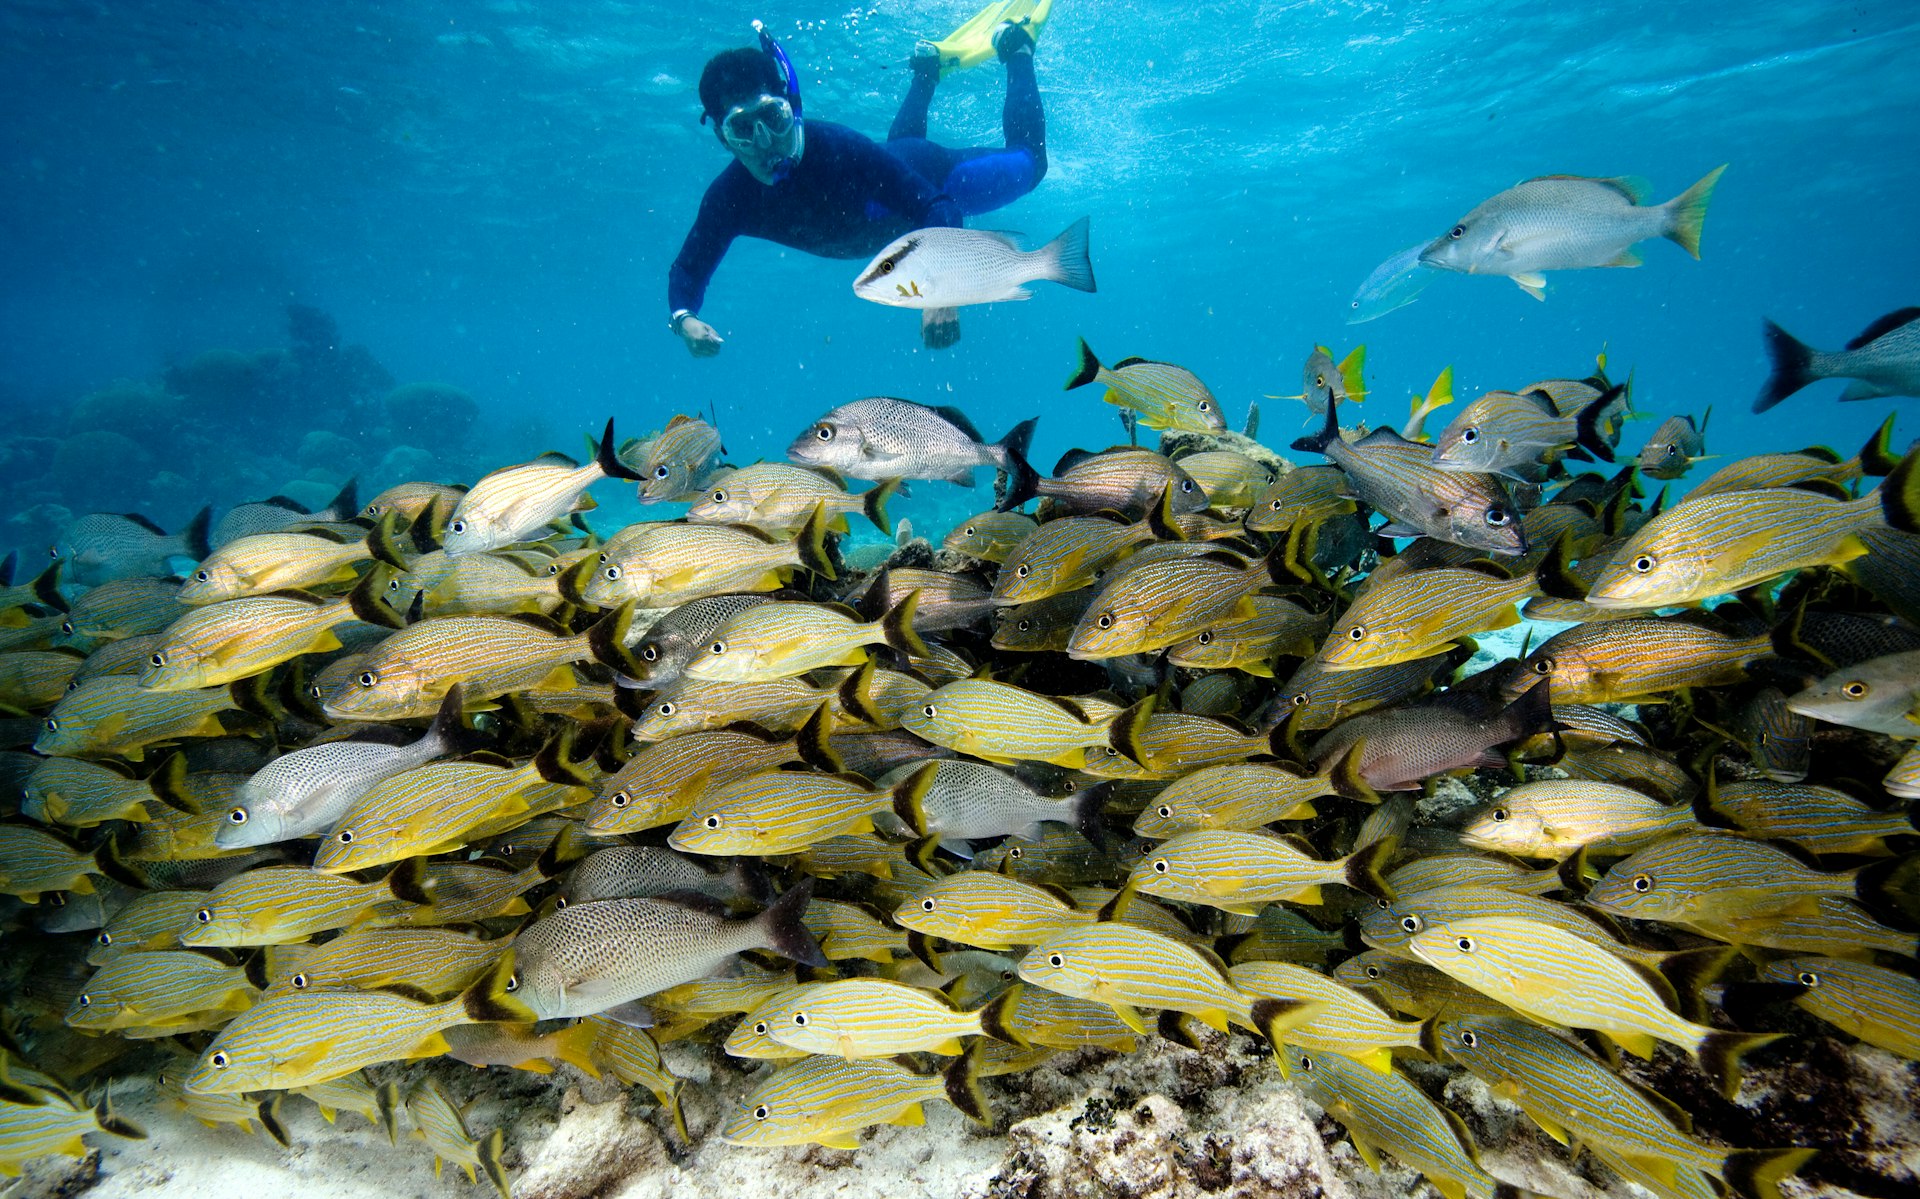 A snorkeler above a school of fish